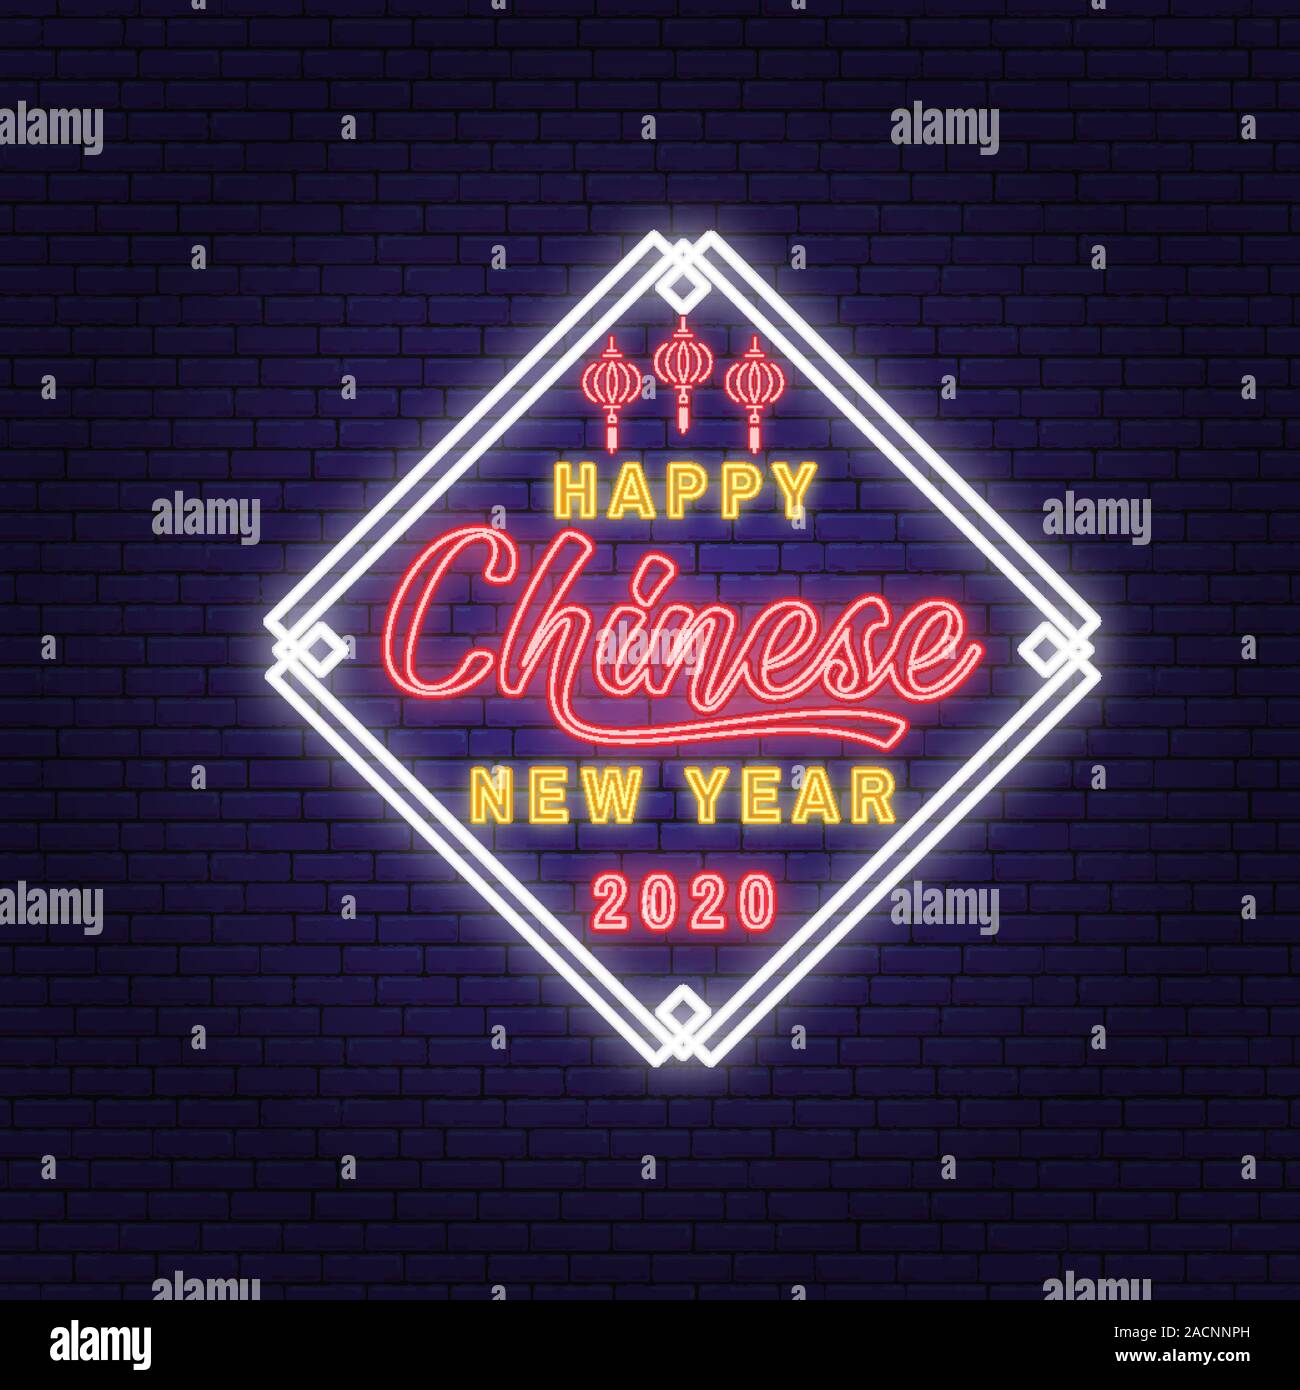 Happy Chinese New Year neon greetings card, flyers, poster in retro style. Vector illustration. Chinese New Year neon sign with lantern for new year emblem, bright signboard, light banner. Stock Vector